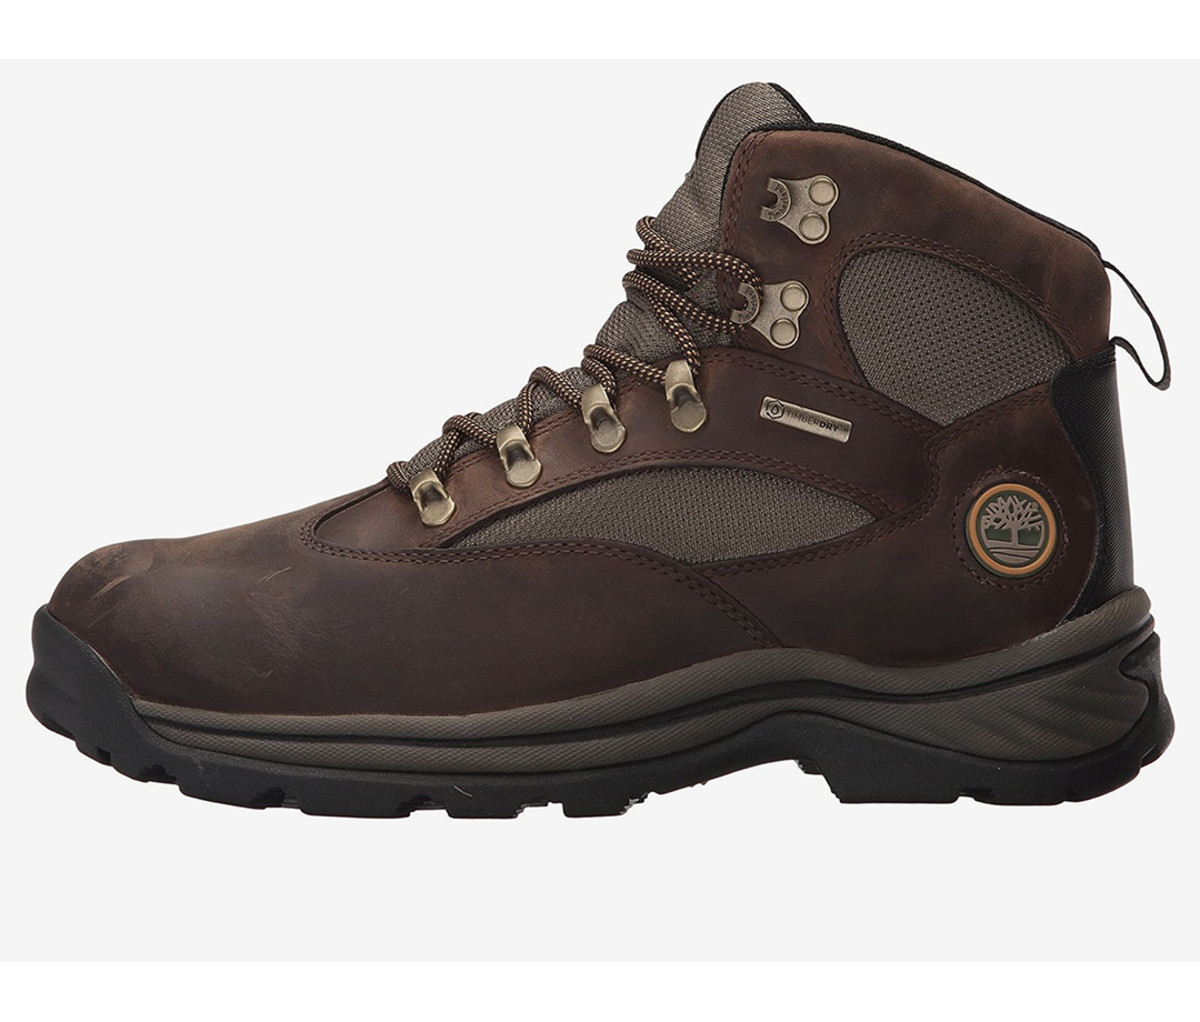 Hike in Comfort No Matter The Weather With These Timberland Waterproof ...